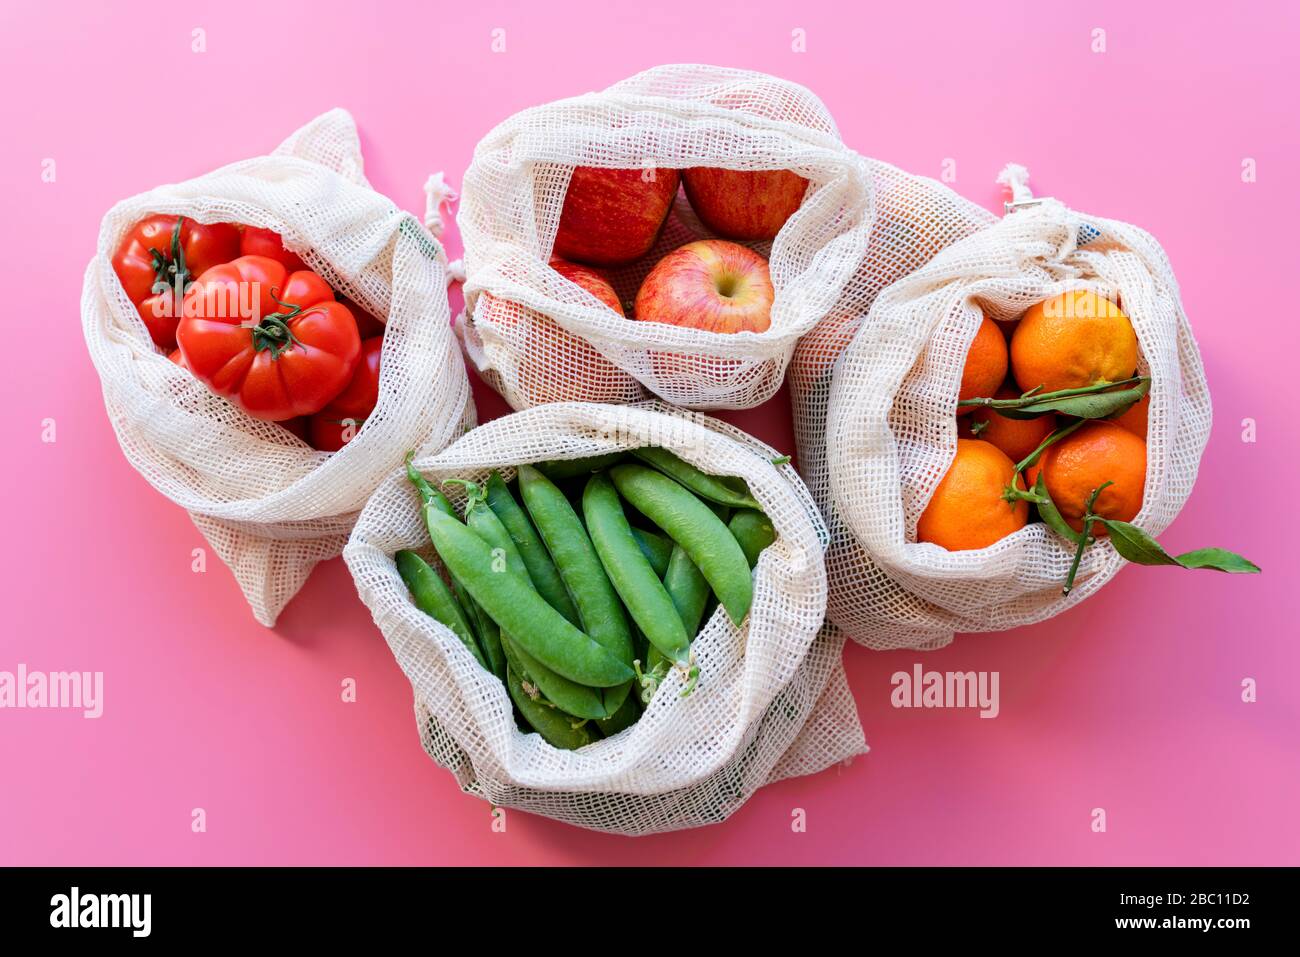 Eco-friendly reusable mesh bags with fresh green peas, tomatoes, apples and clementines Stock Photo